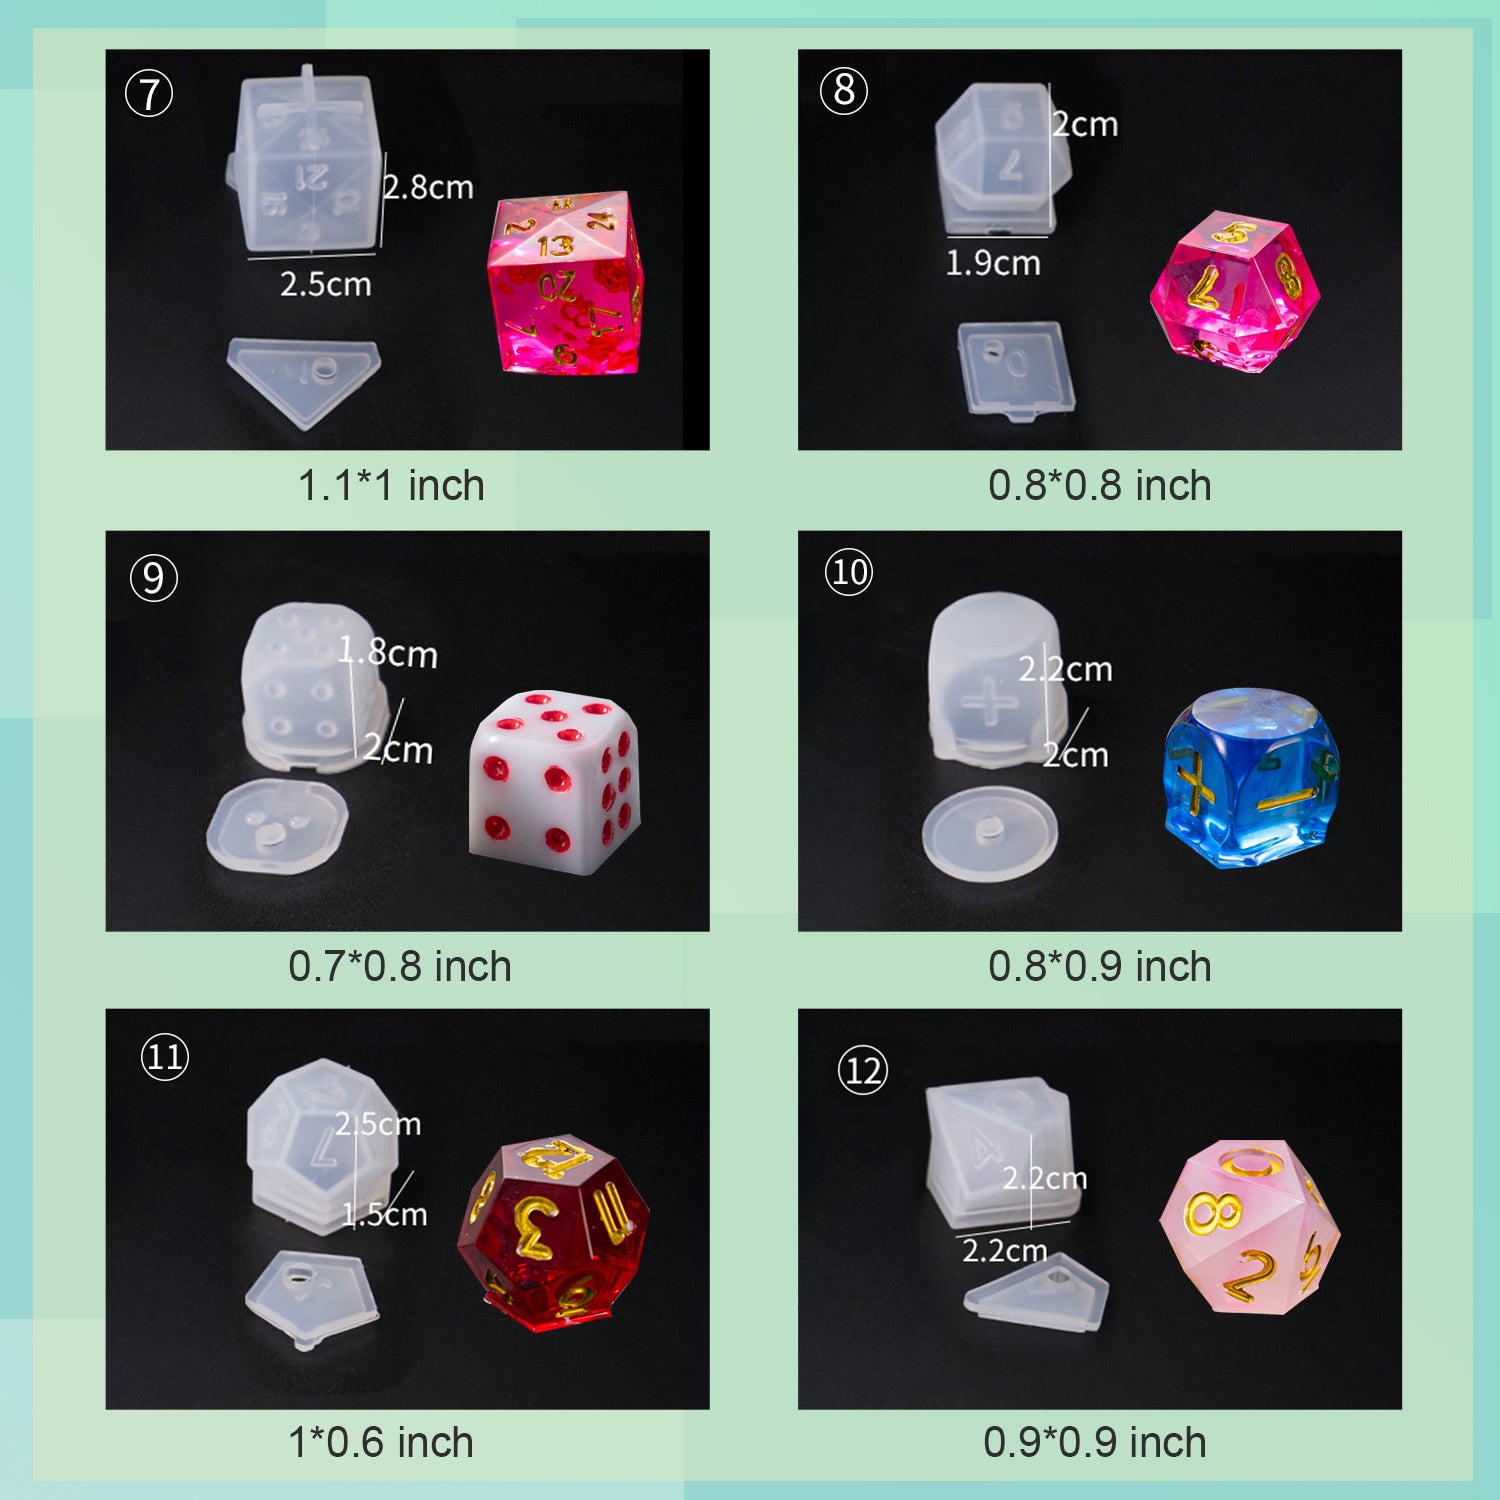 Polyhedral Dice Mold Set - 7 Pcs – Let's Resin